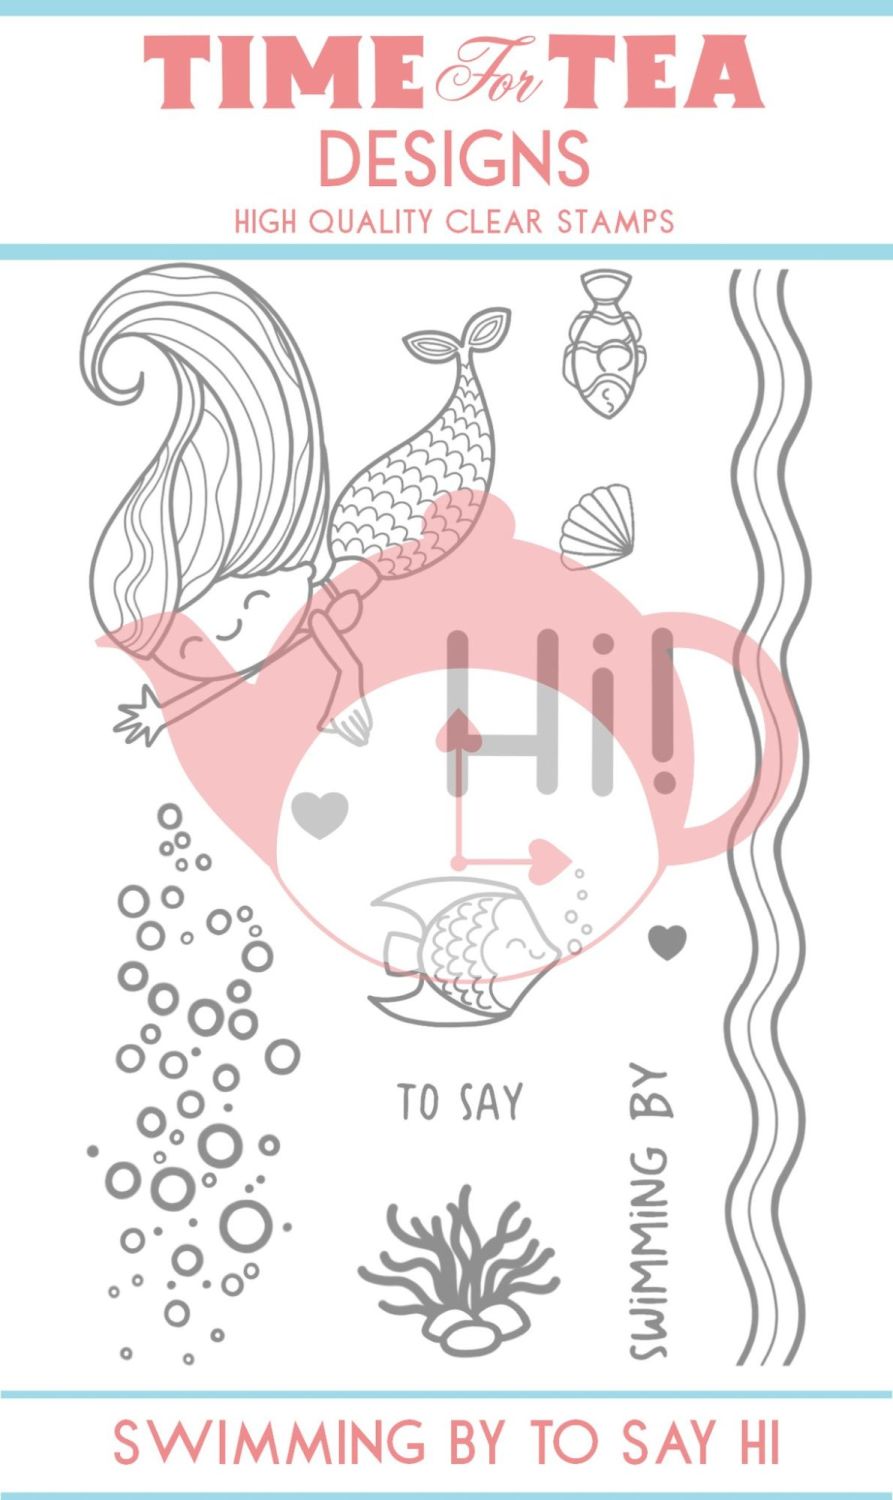 Time For Tea - Swimming by to say hi! Clear Stamp Set